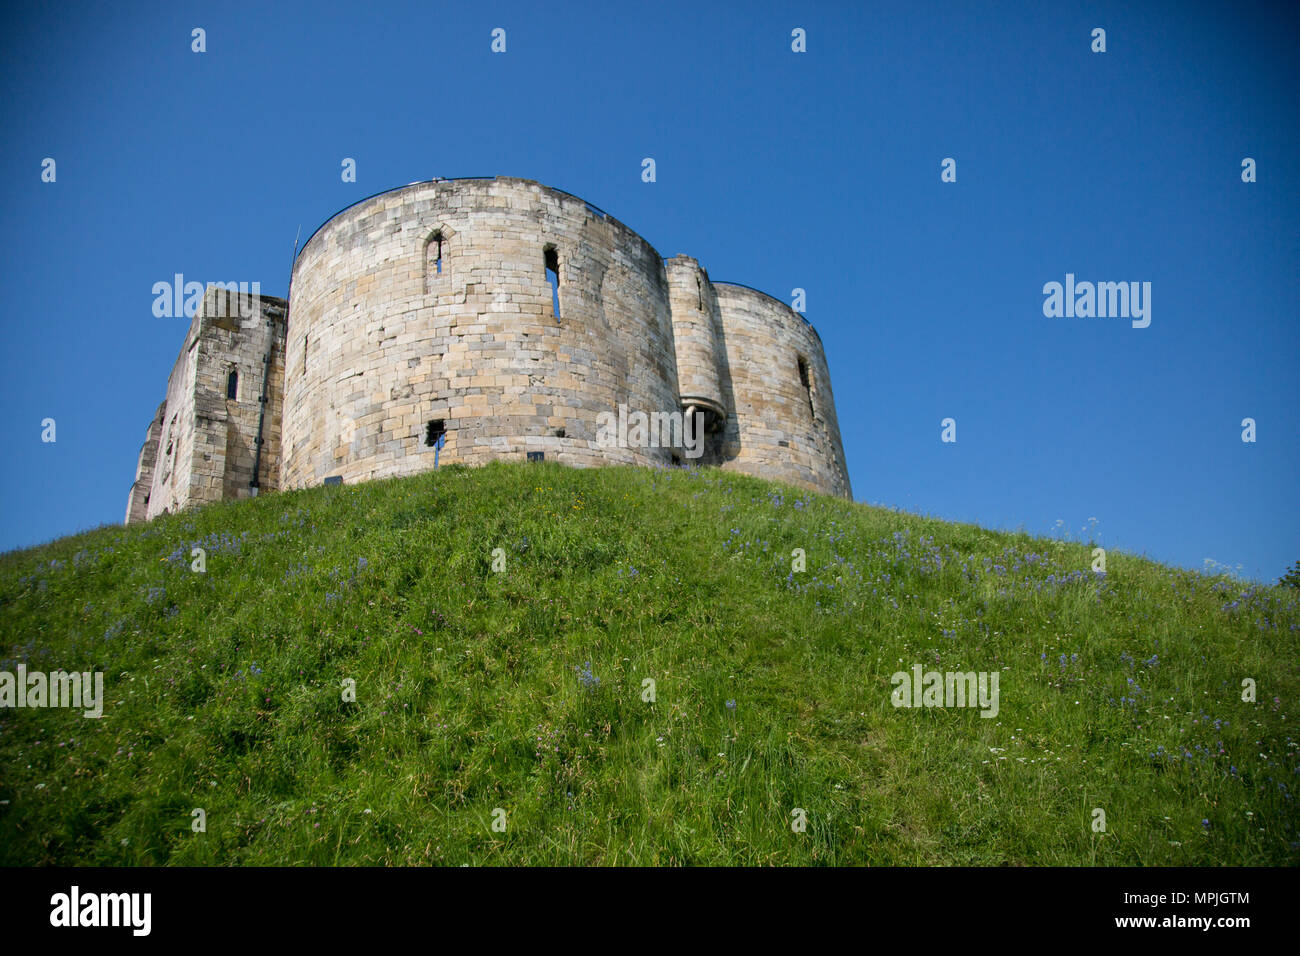 Clifford's tower in the town of York in Yorkshire is all that remains of York Castle with unrivalled views of York Minster and the city of York. Stock Photo